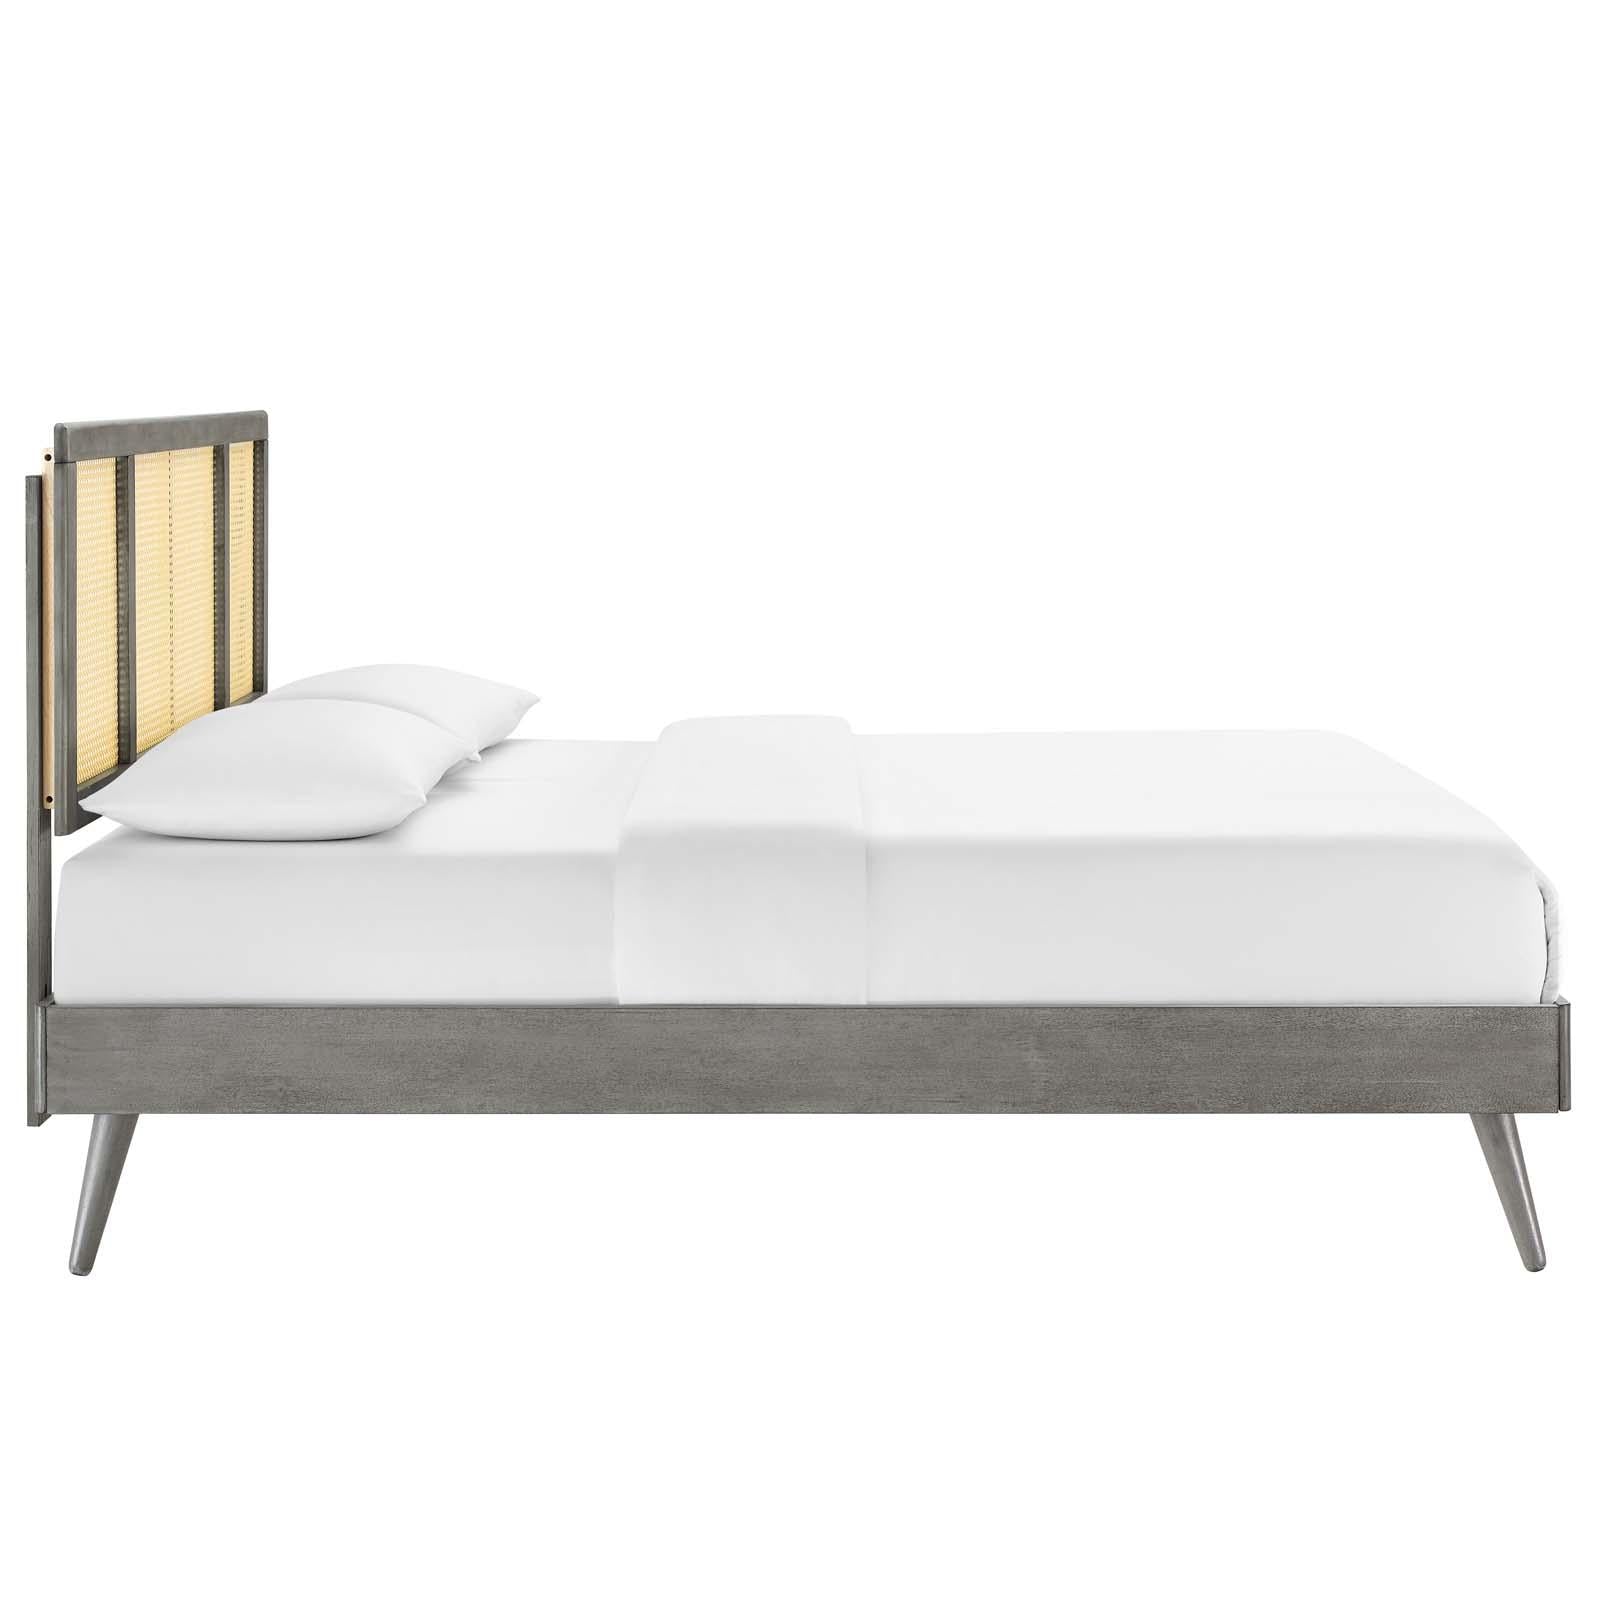 Modway Furniture Modern Kelsea Cane and Wood Full Platform Bed With Splayed Legs - MOD-6696